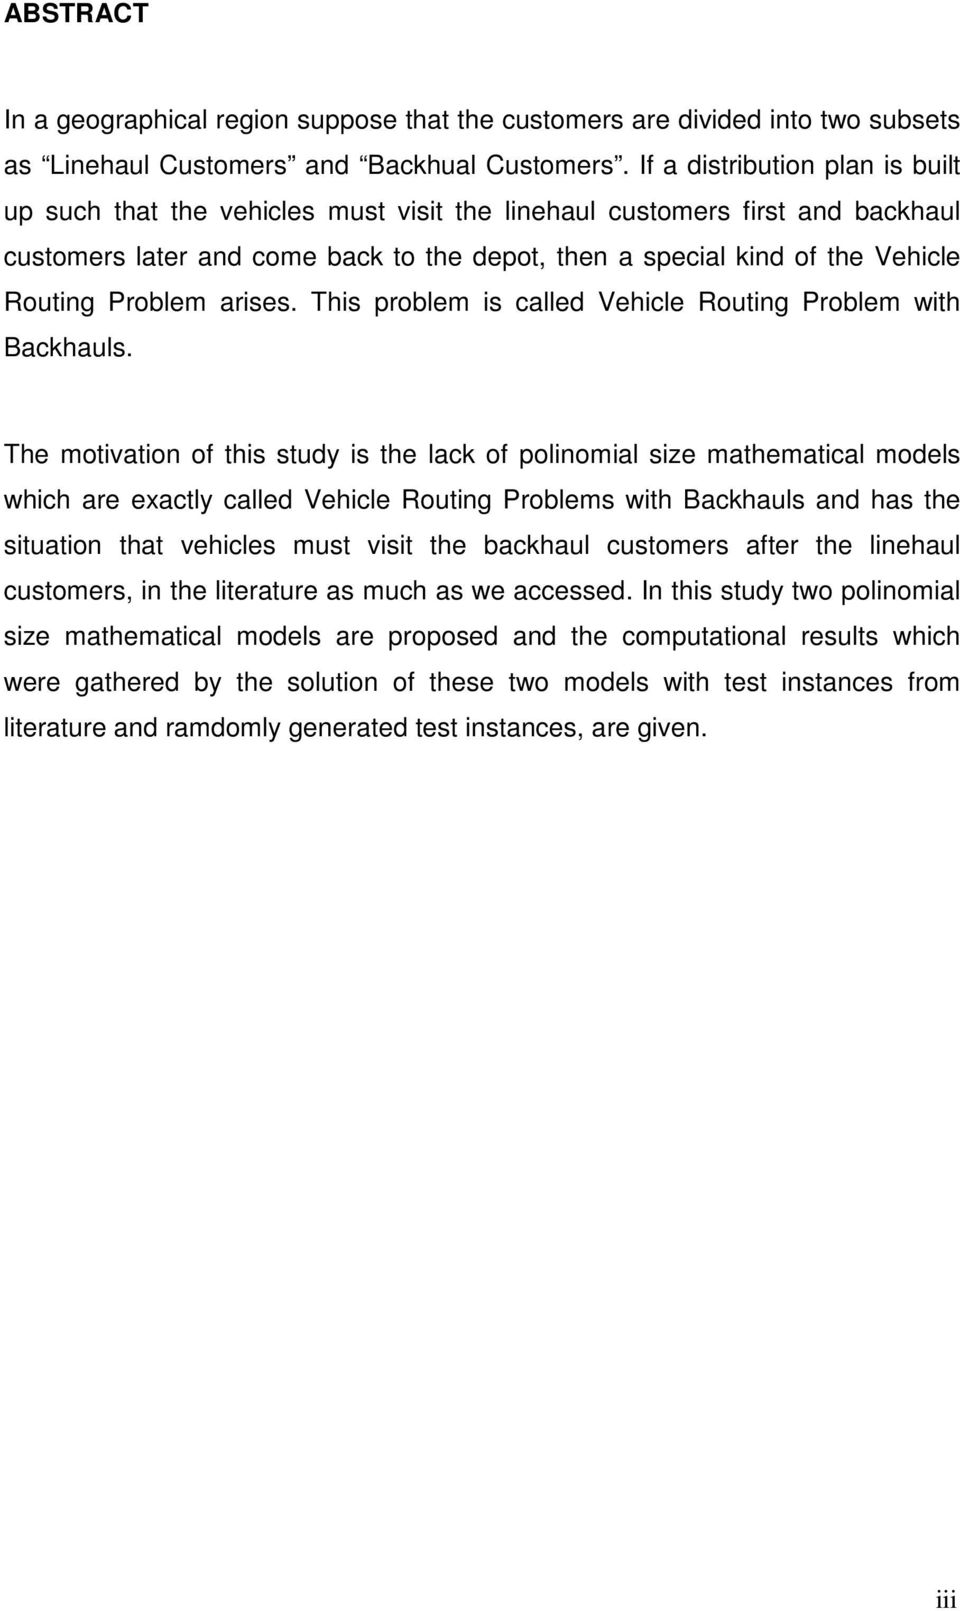 Problem arises. This problem is called Vehicle Routing Problem with Backhauls.